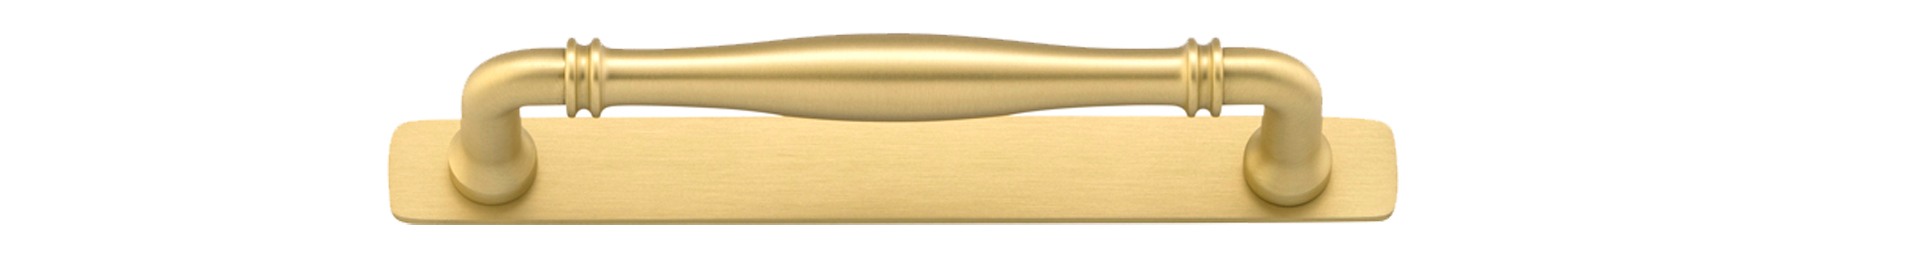 17105B - Sarlat Cabinet Pull with Backplate - CTC160mm - Brushed Gold PVD